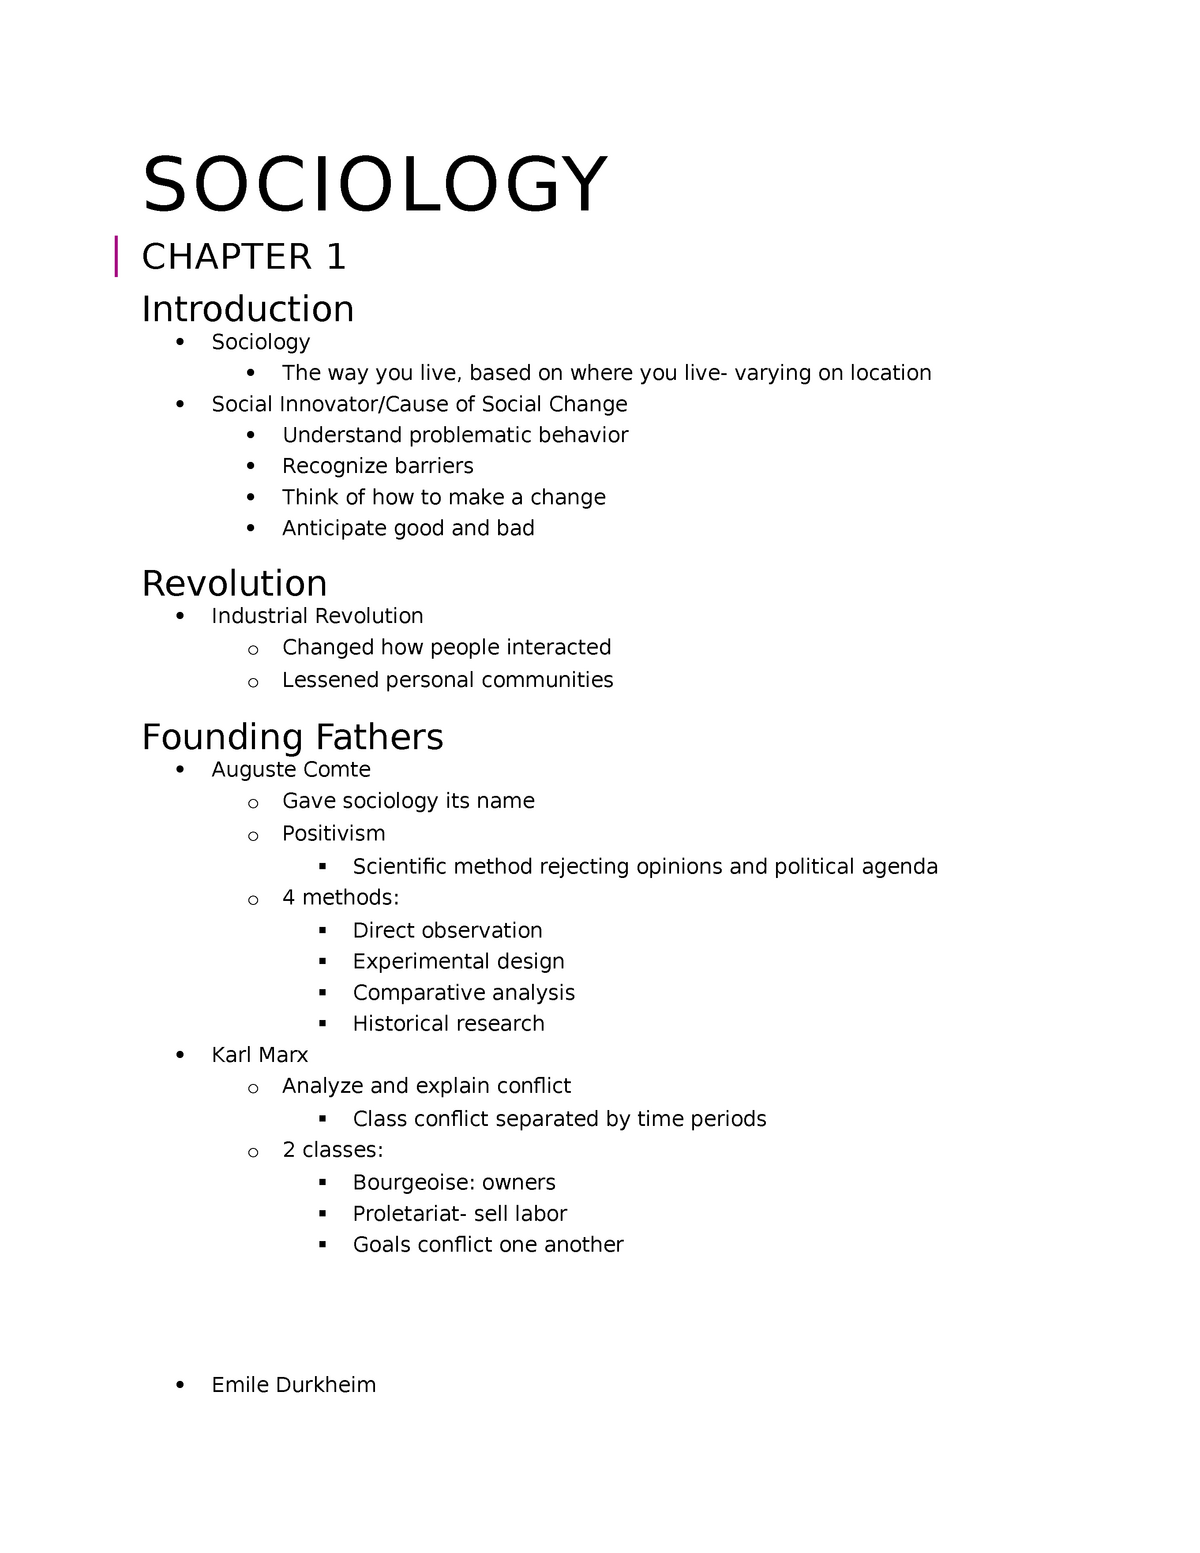 thesis topic for sociology students